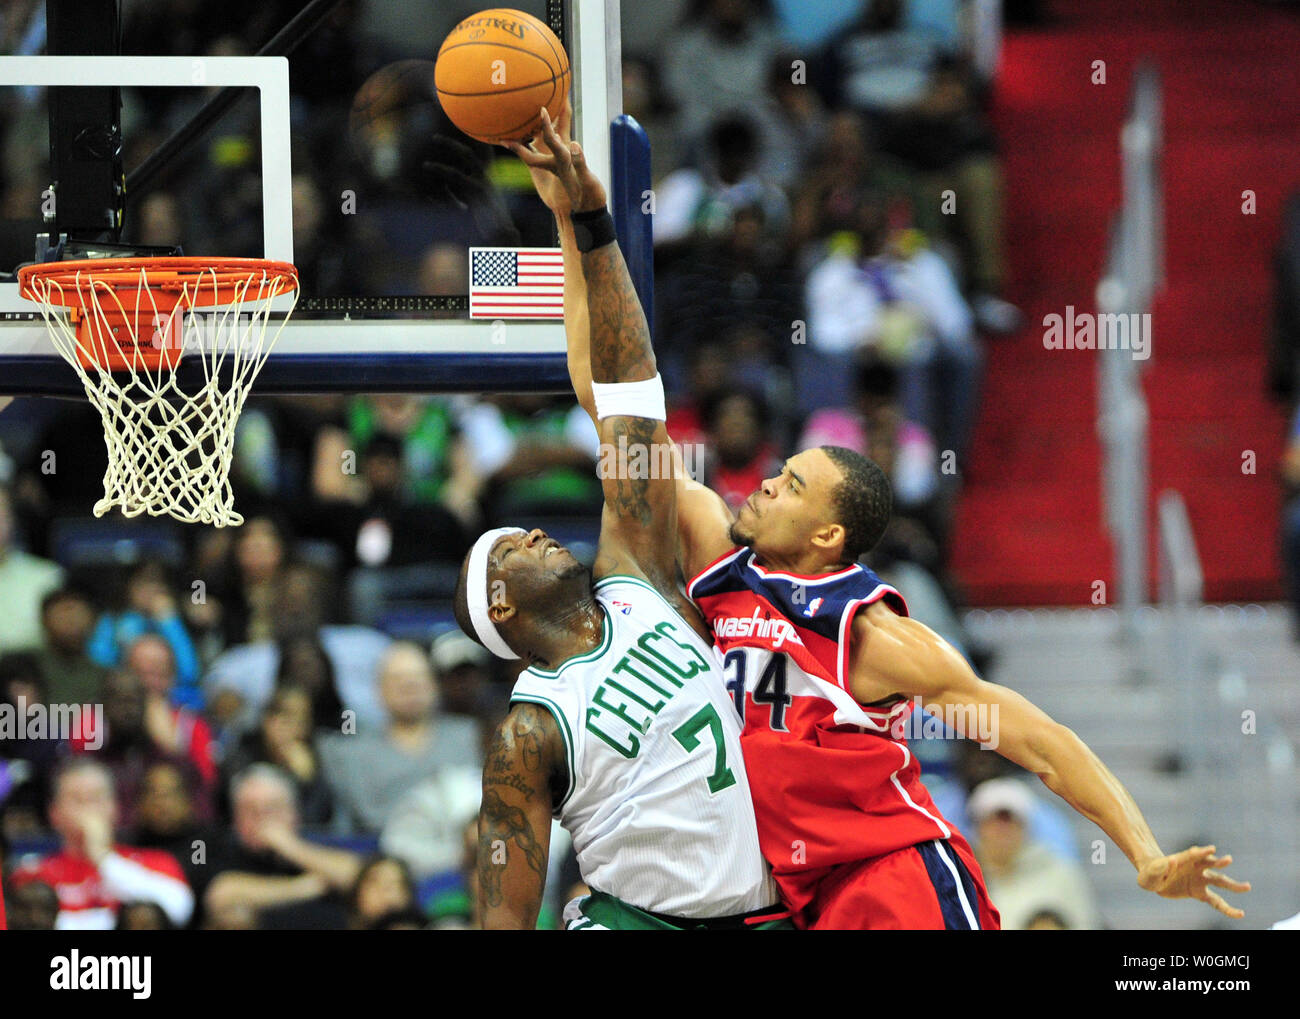 Jermaine oneal hi-res stock photography and images - Alamy